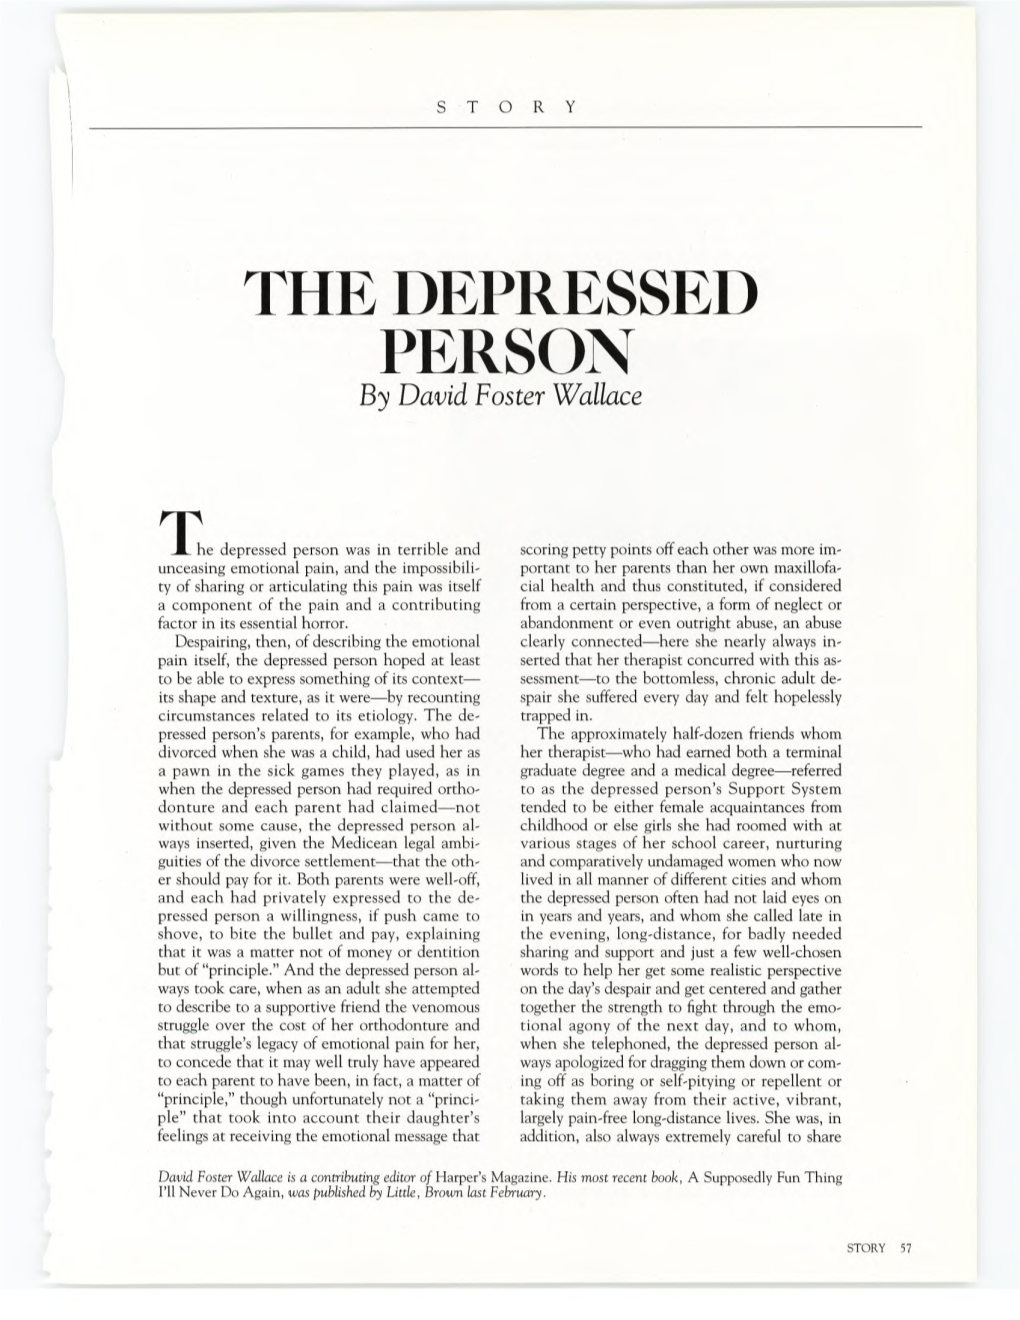 THE DEPRESSED PERSON by David Foster Wallace